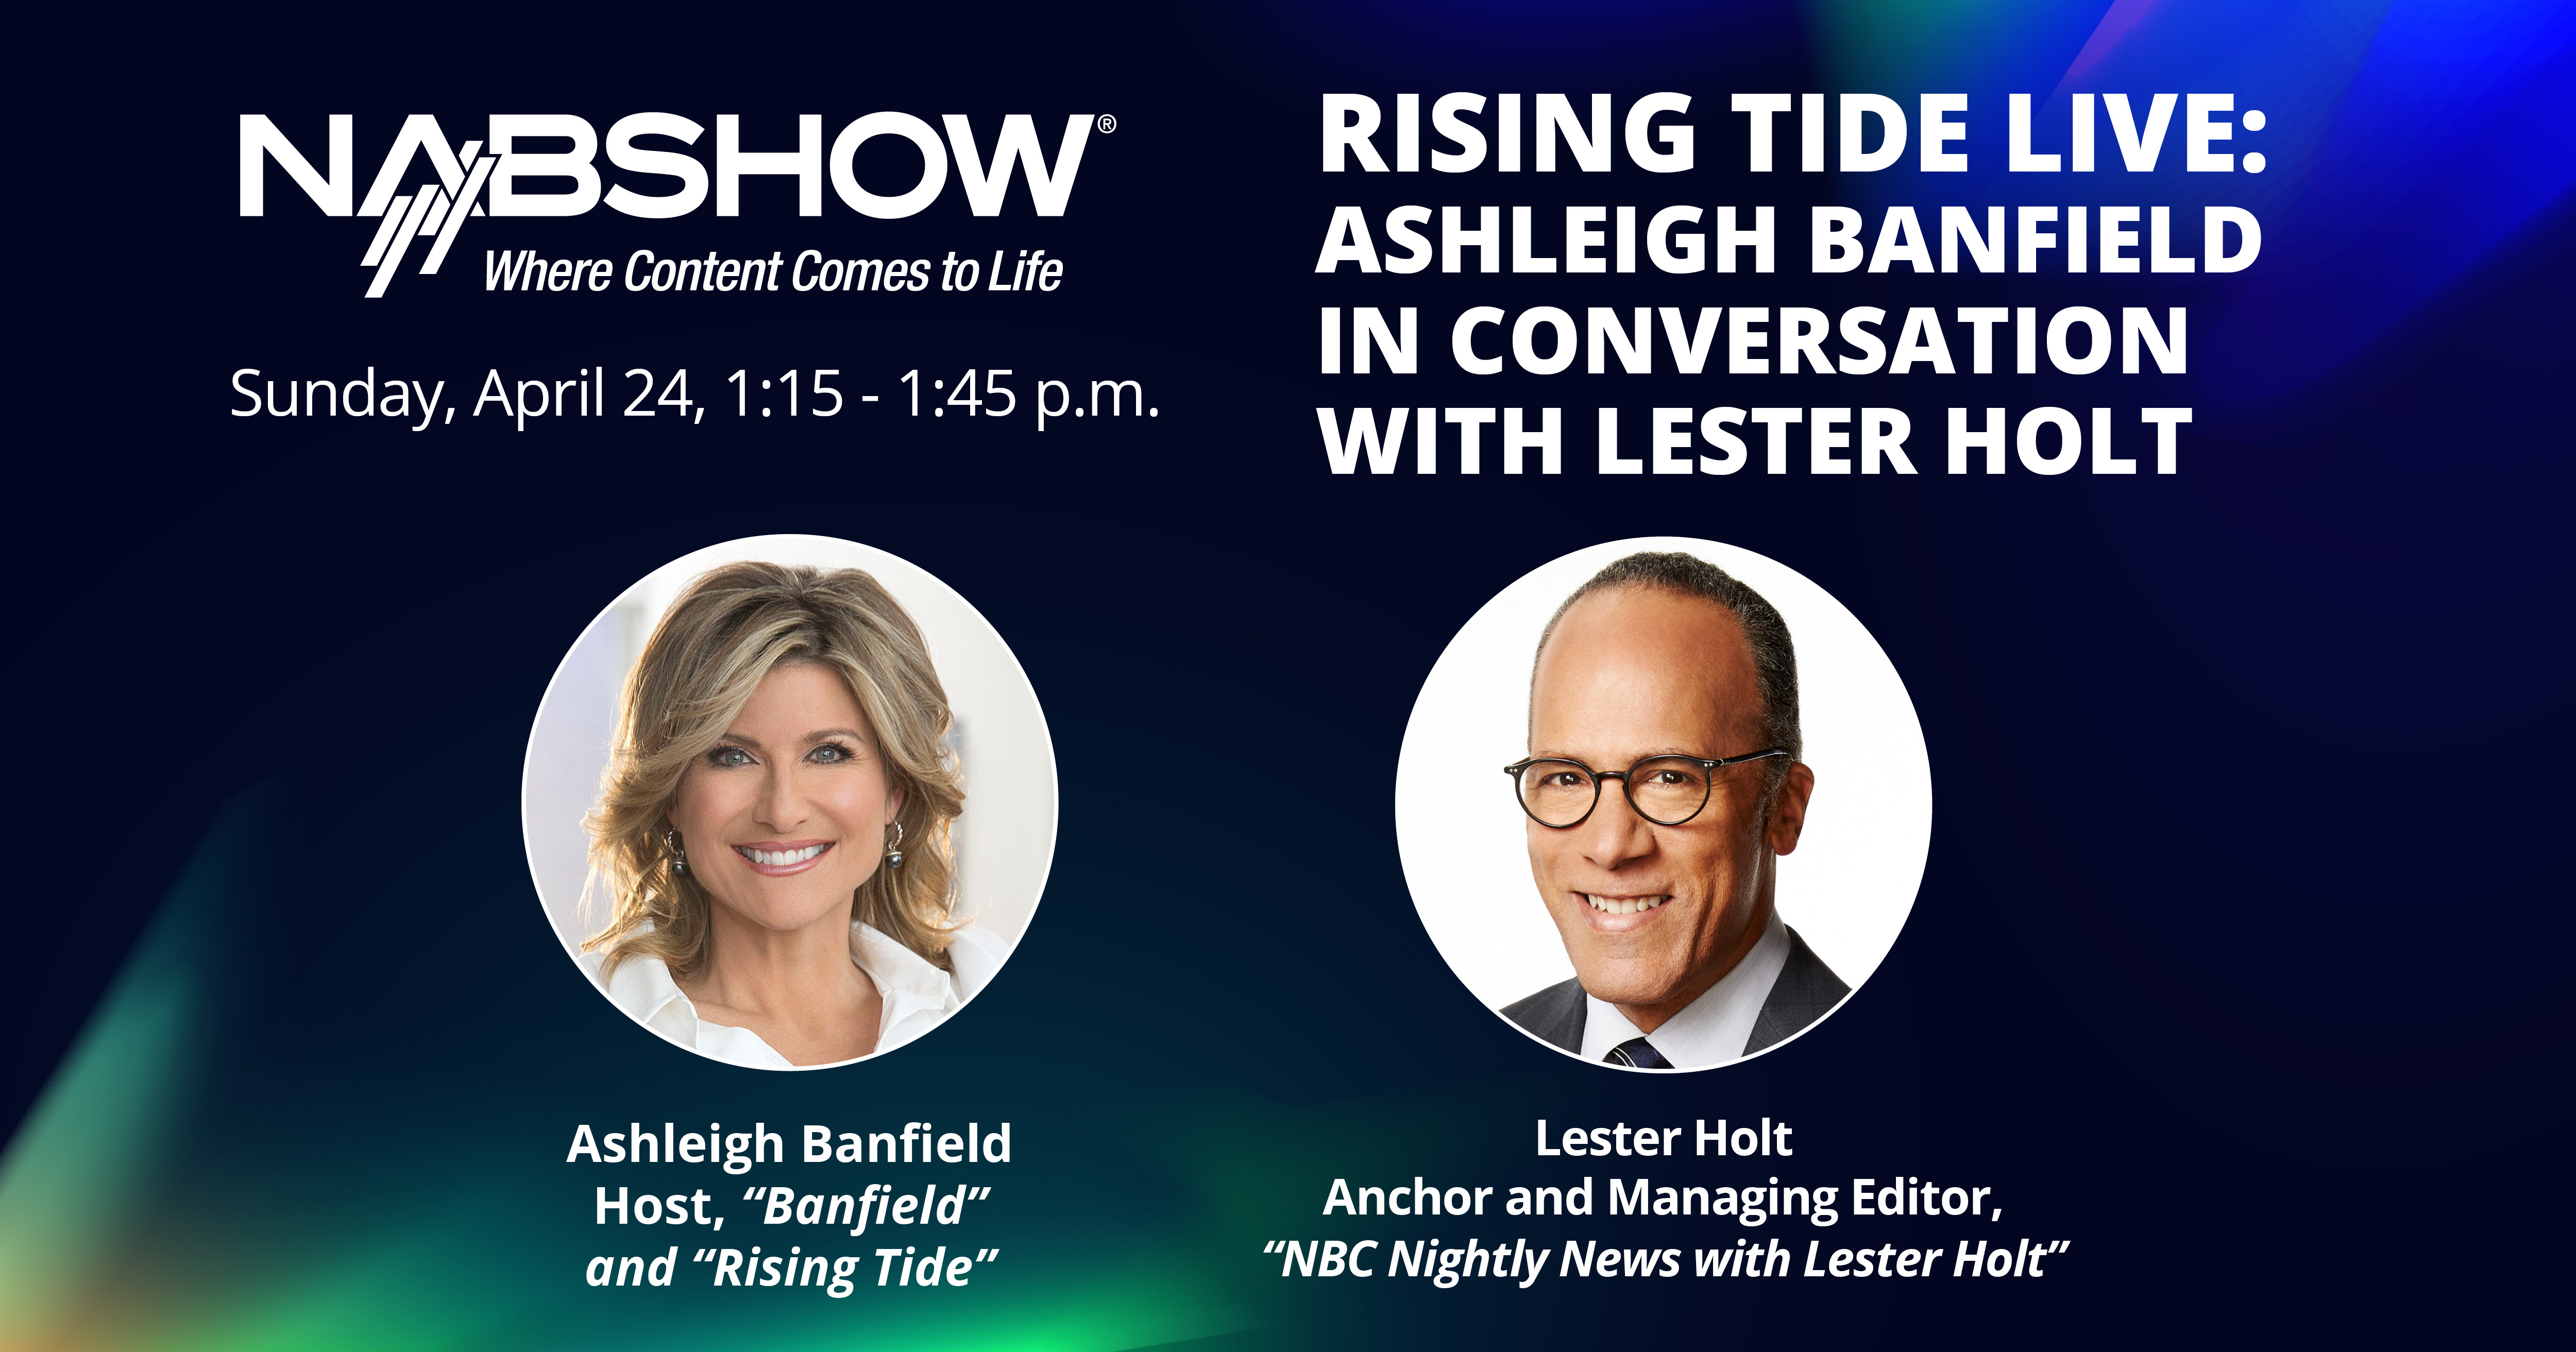 Award-winning journalist Ashleigh Banfield to reunite with her former MSNBC co-anchor Lester Holt at the 2022 NAB Show running April 24-27.